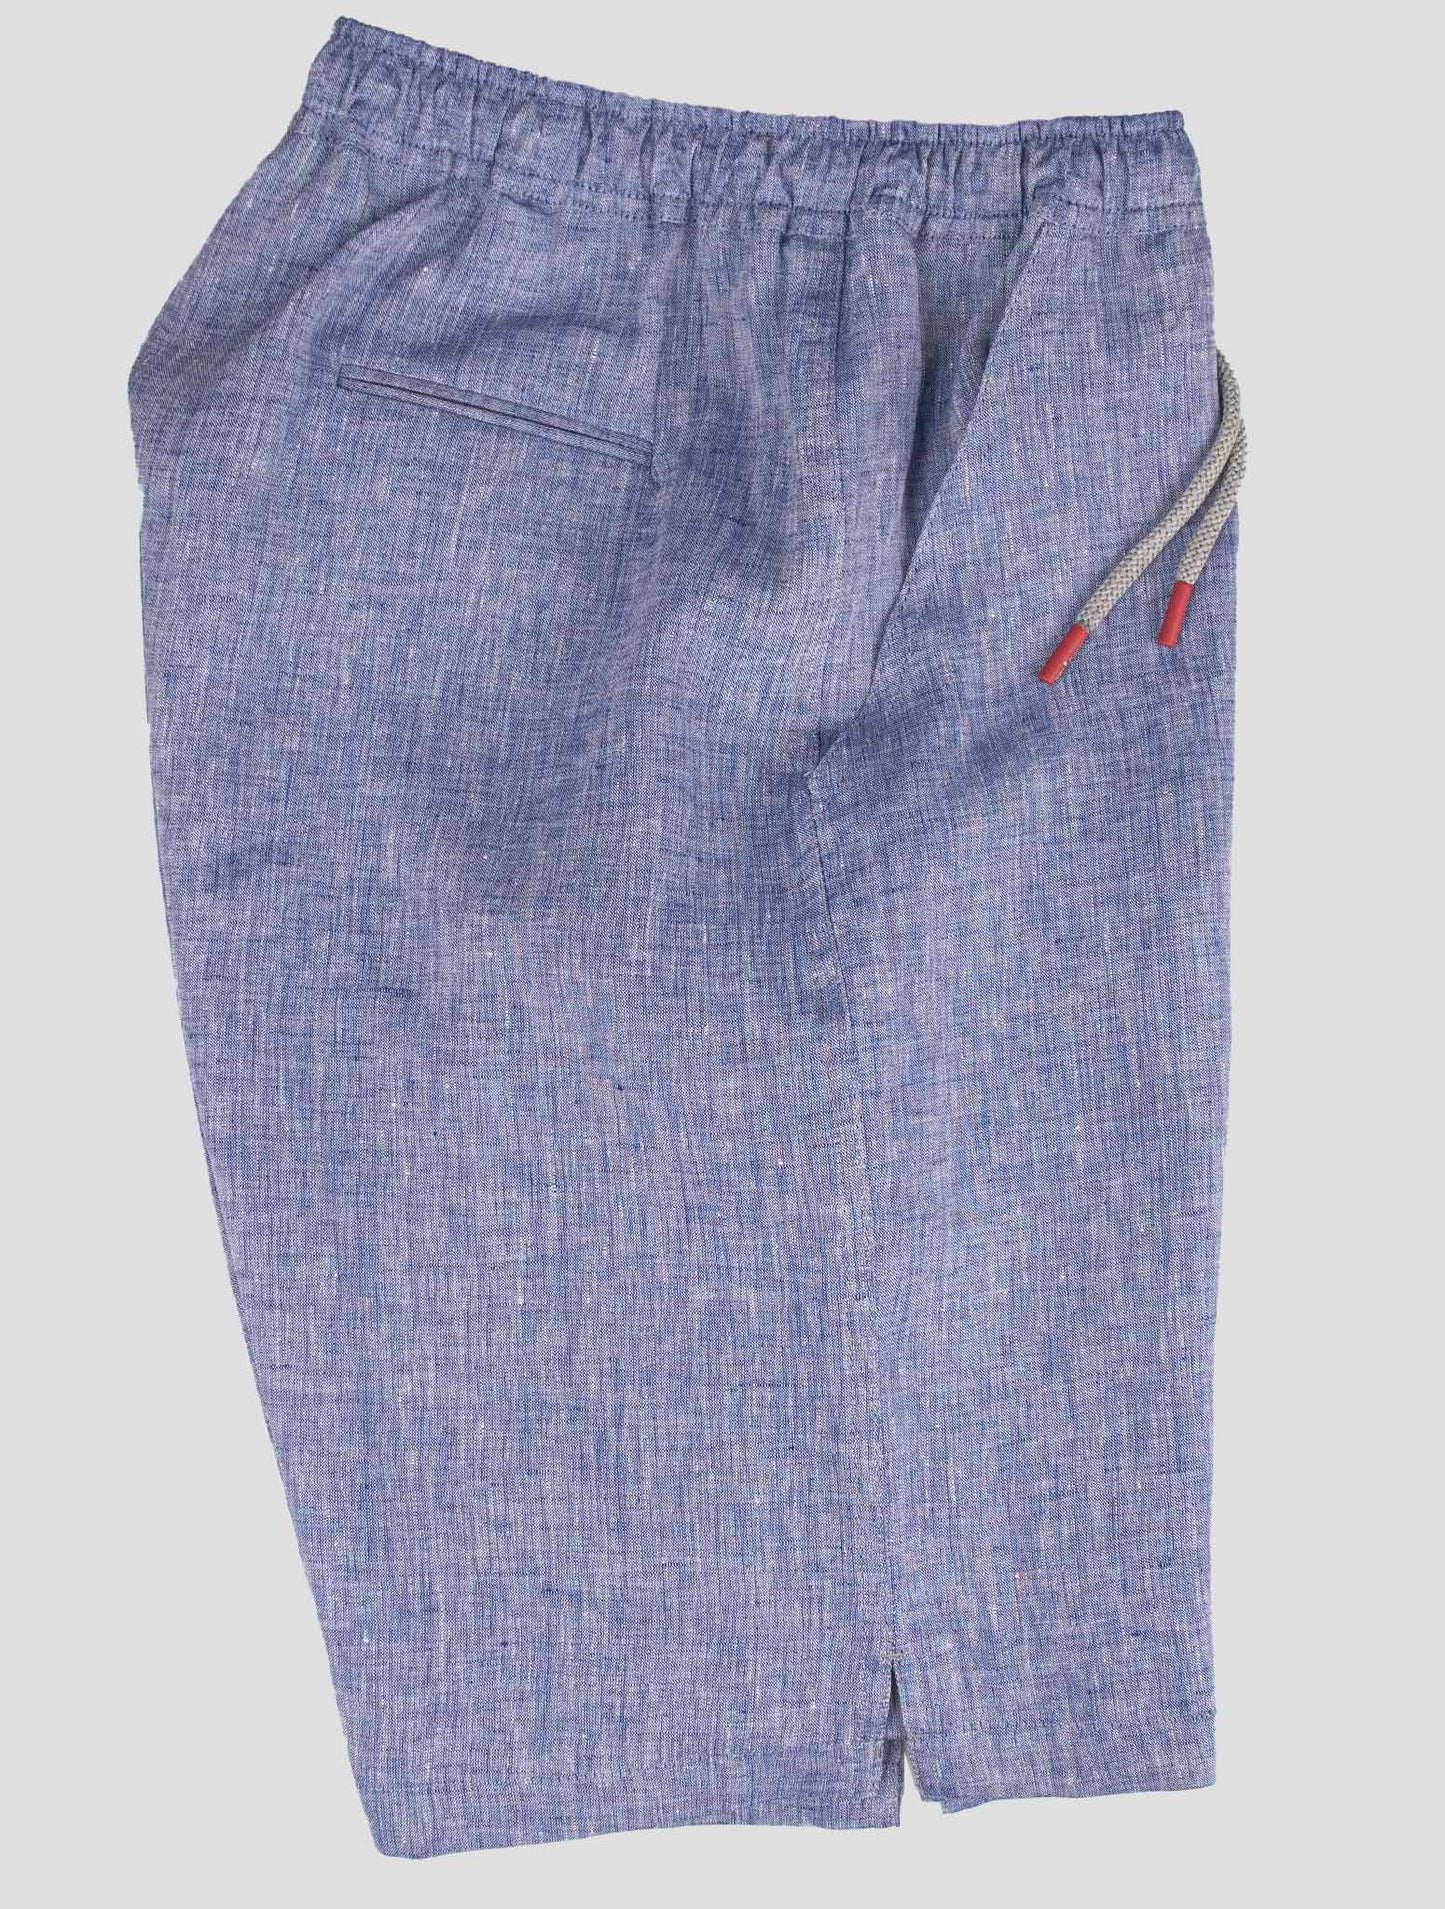 Kiton Matching Outfit - Blue Mariano and Violet Short Pants Tracksuit